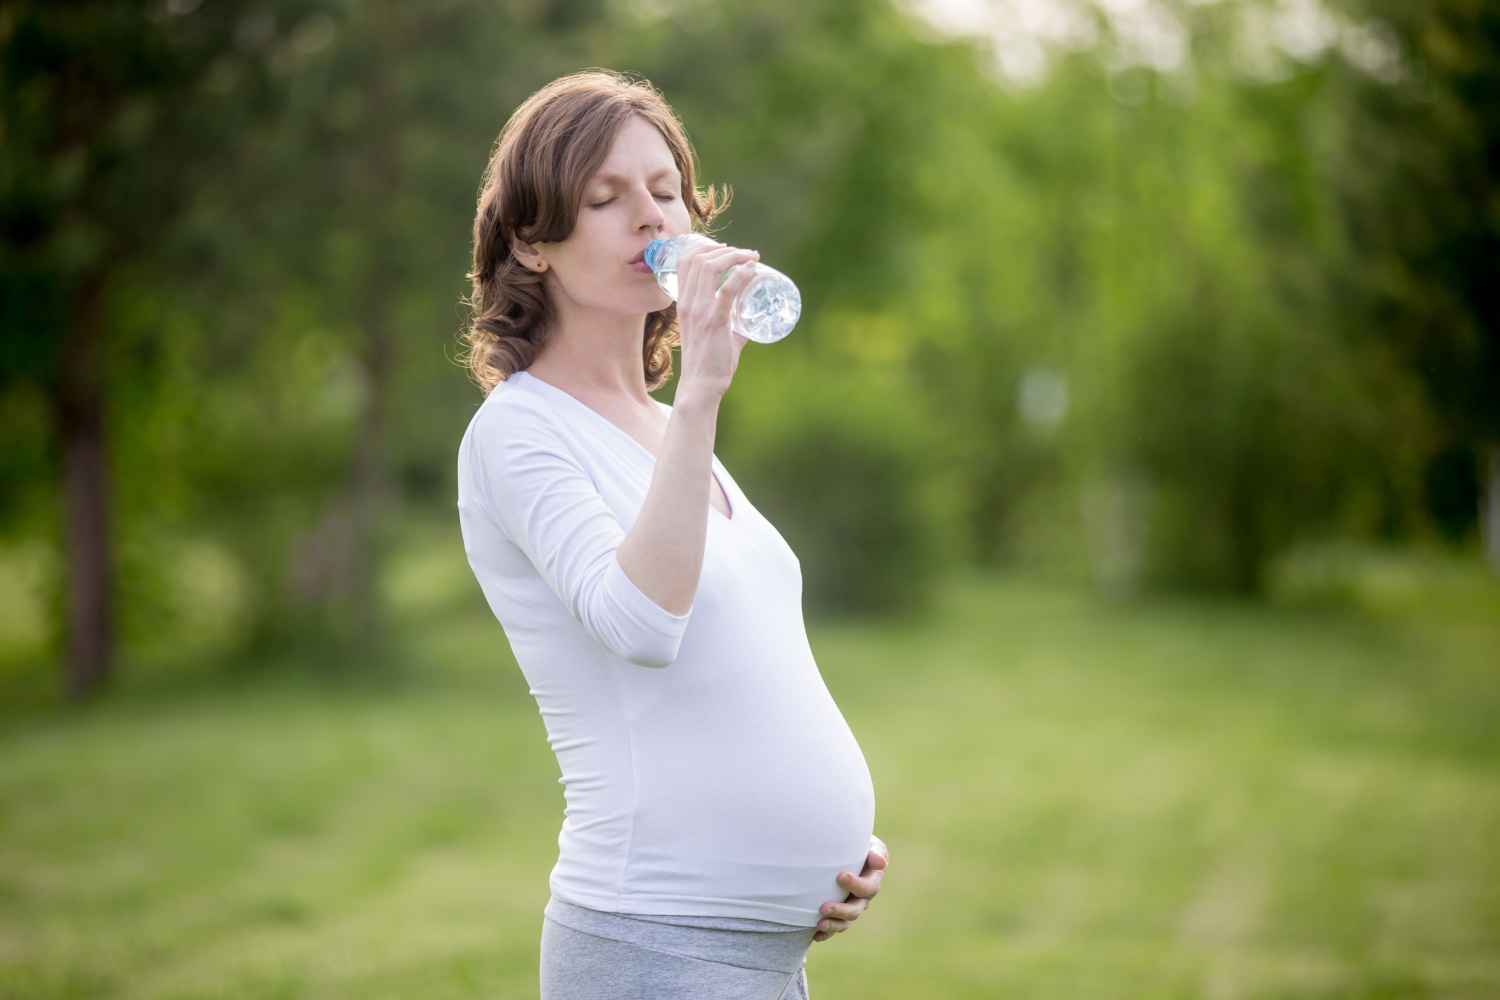 Is Drinking Bottled Water Safe During Pregnancy?